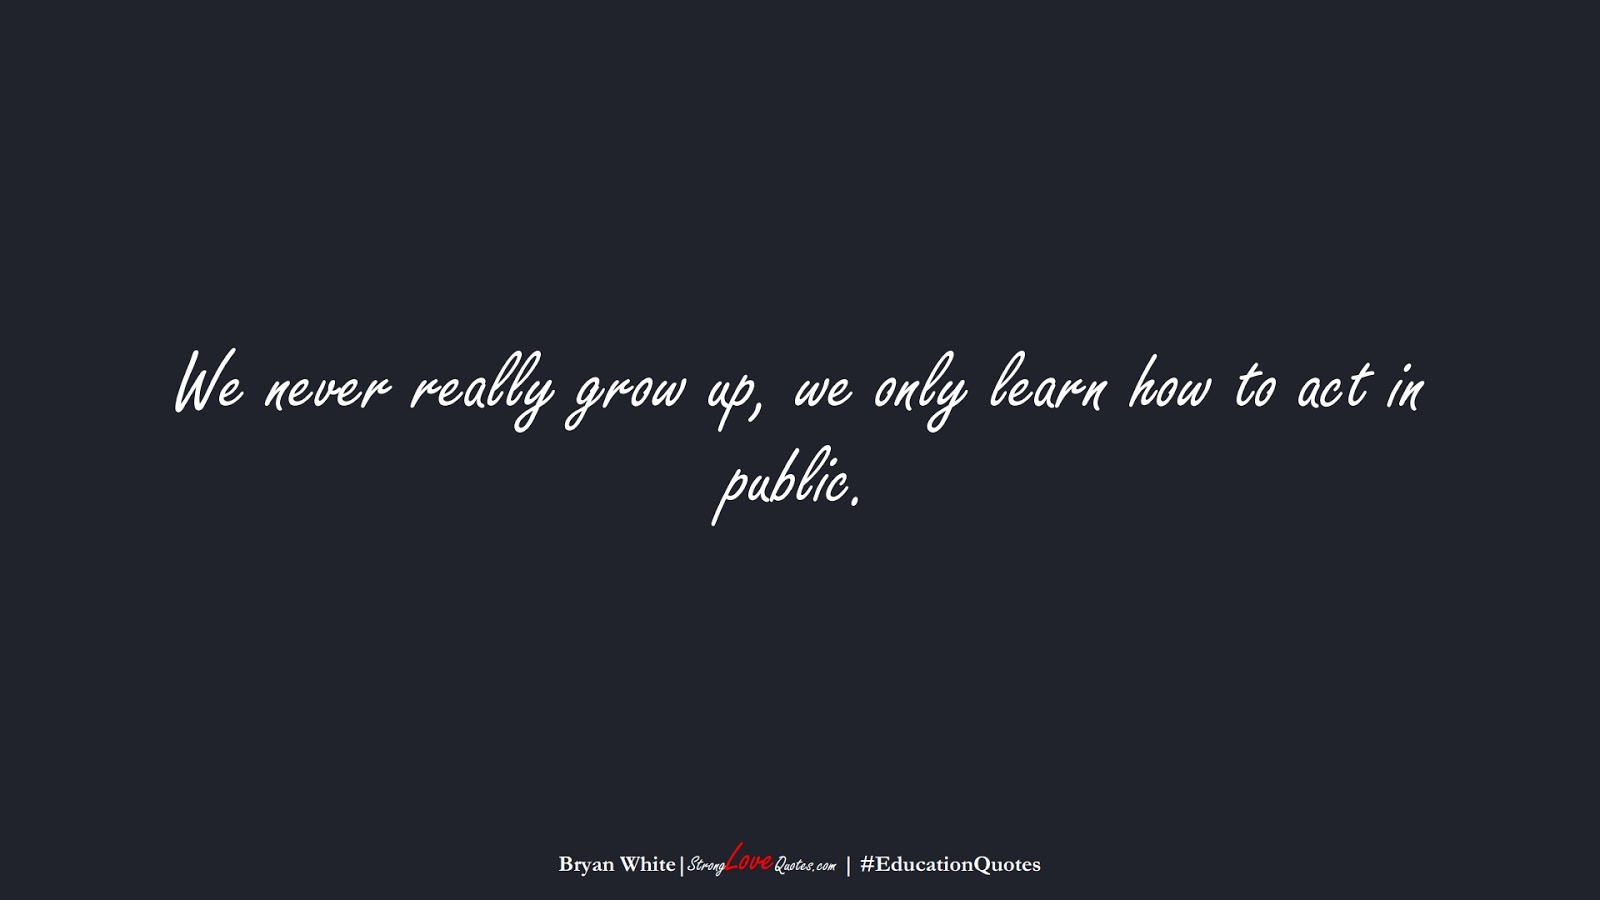 We never really grow up, we only learn how to act in public. (Bryan White);  #EducationQuotes